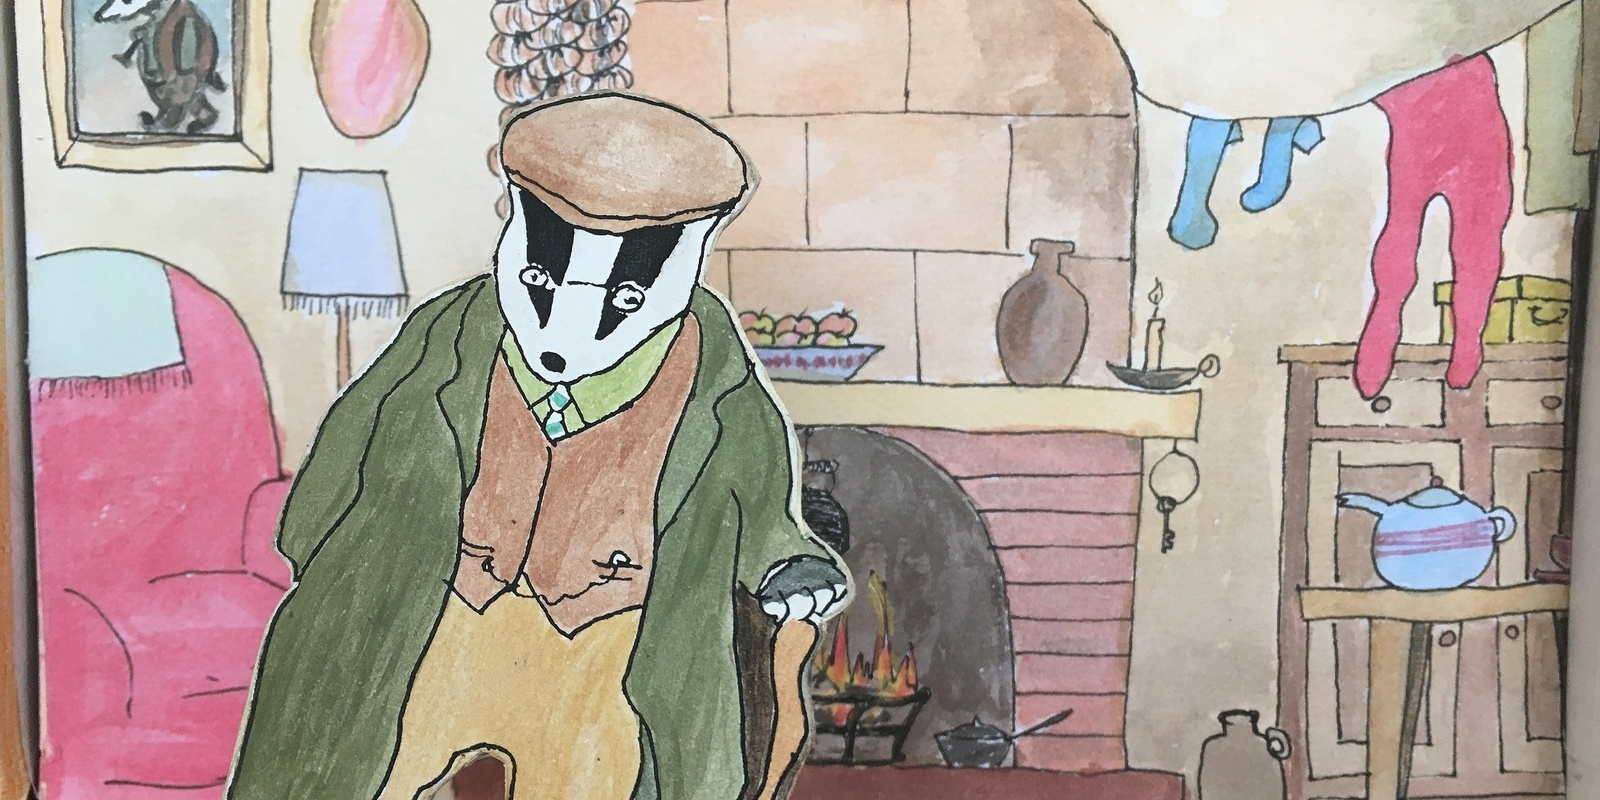 Banner image for Mr Badger tells the story of "The Wind in the Willows"